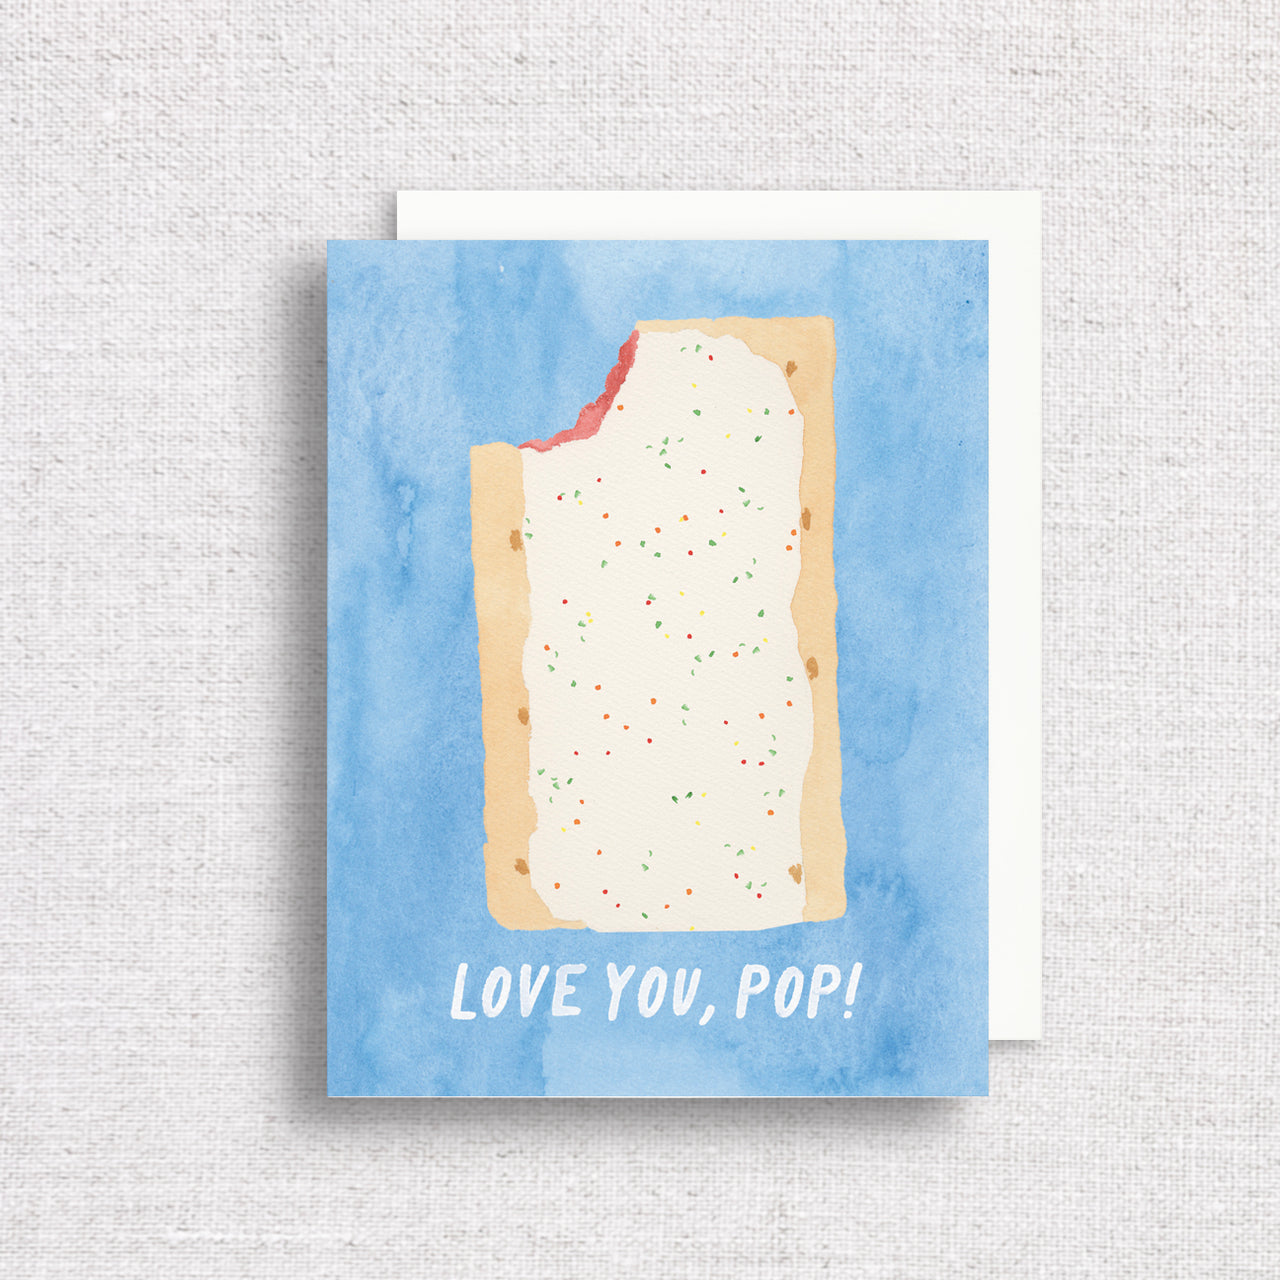 Love You, Pop Toaster Pastry Greeting Card by Gert & Co